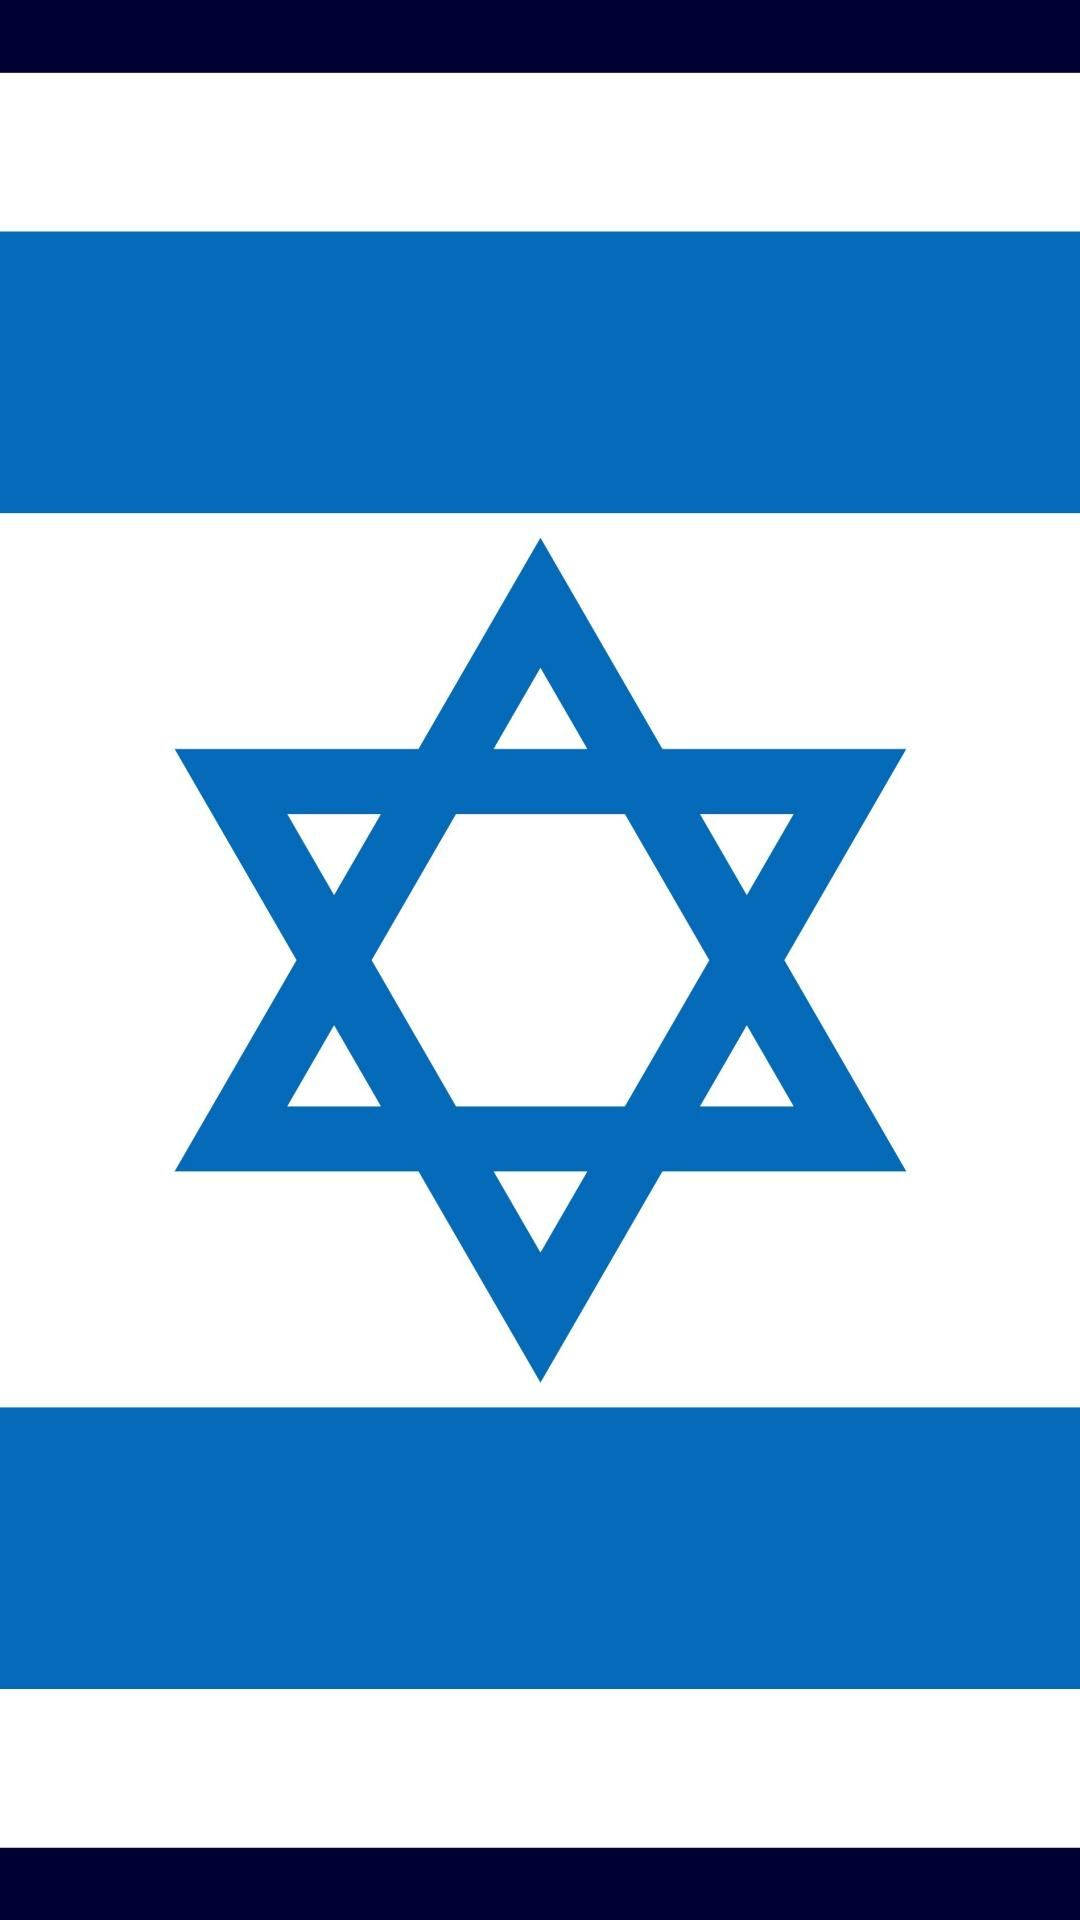 The National Flag Of Israel Displaying The Star Of David